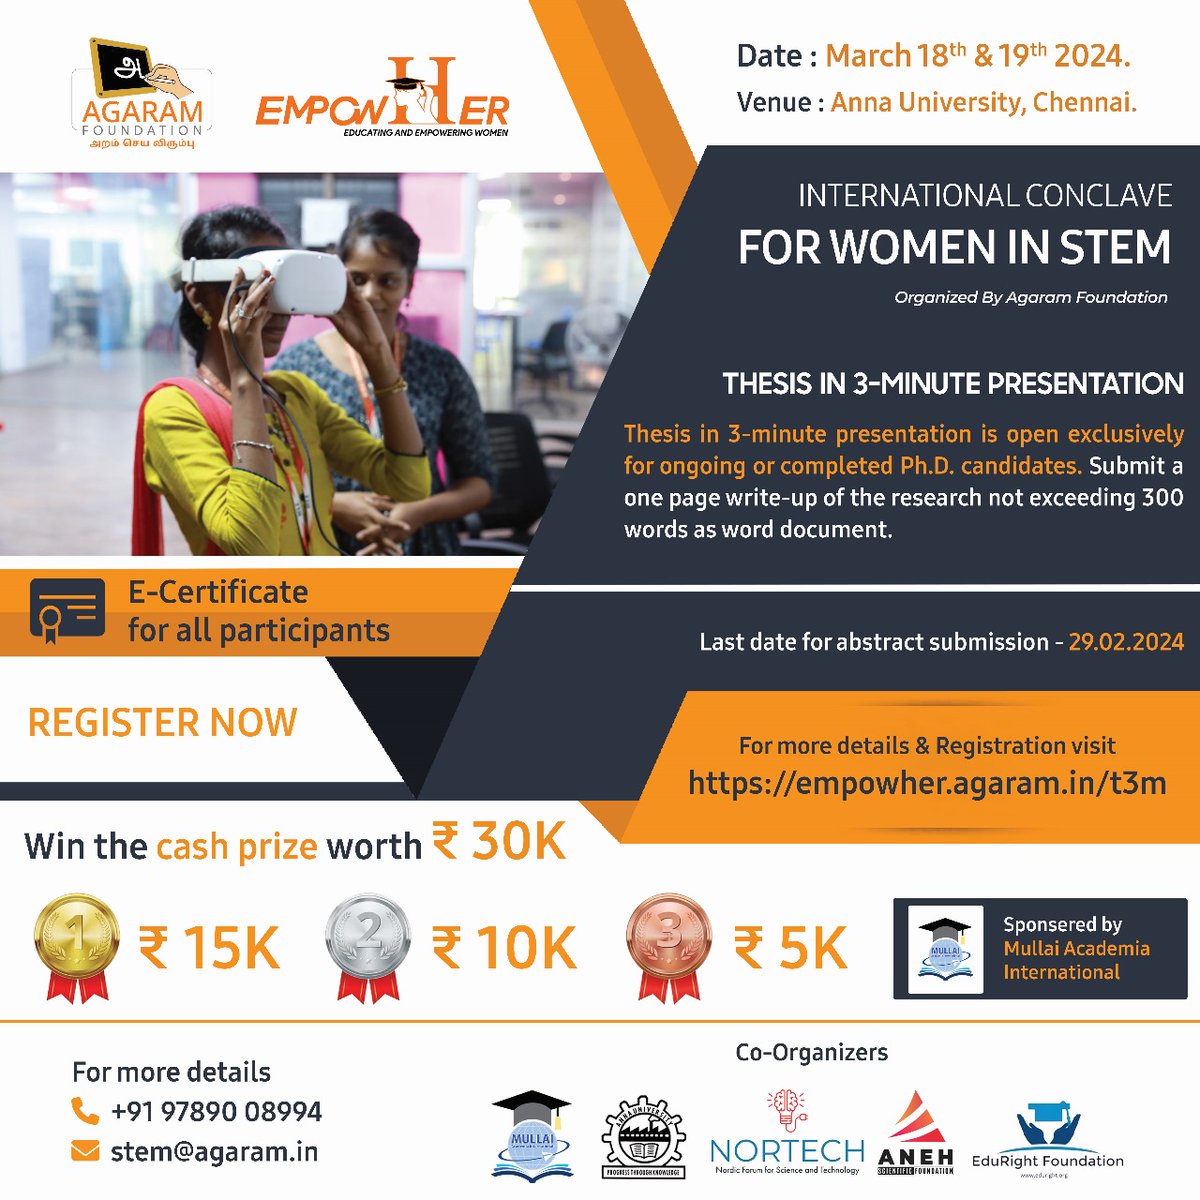 Join us at the International Conclave EMPOWHER for Women in STEM organized by Agaram Foundation! Submit your 3-minute thesis for a chance to win cash prizes worth 30K! Don't miss out!

Register now:
empowher.agaram.in

#EmpowHER #WomenInSTEM #AgaramFoundation #STEMConclave